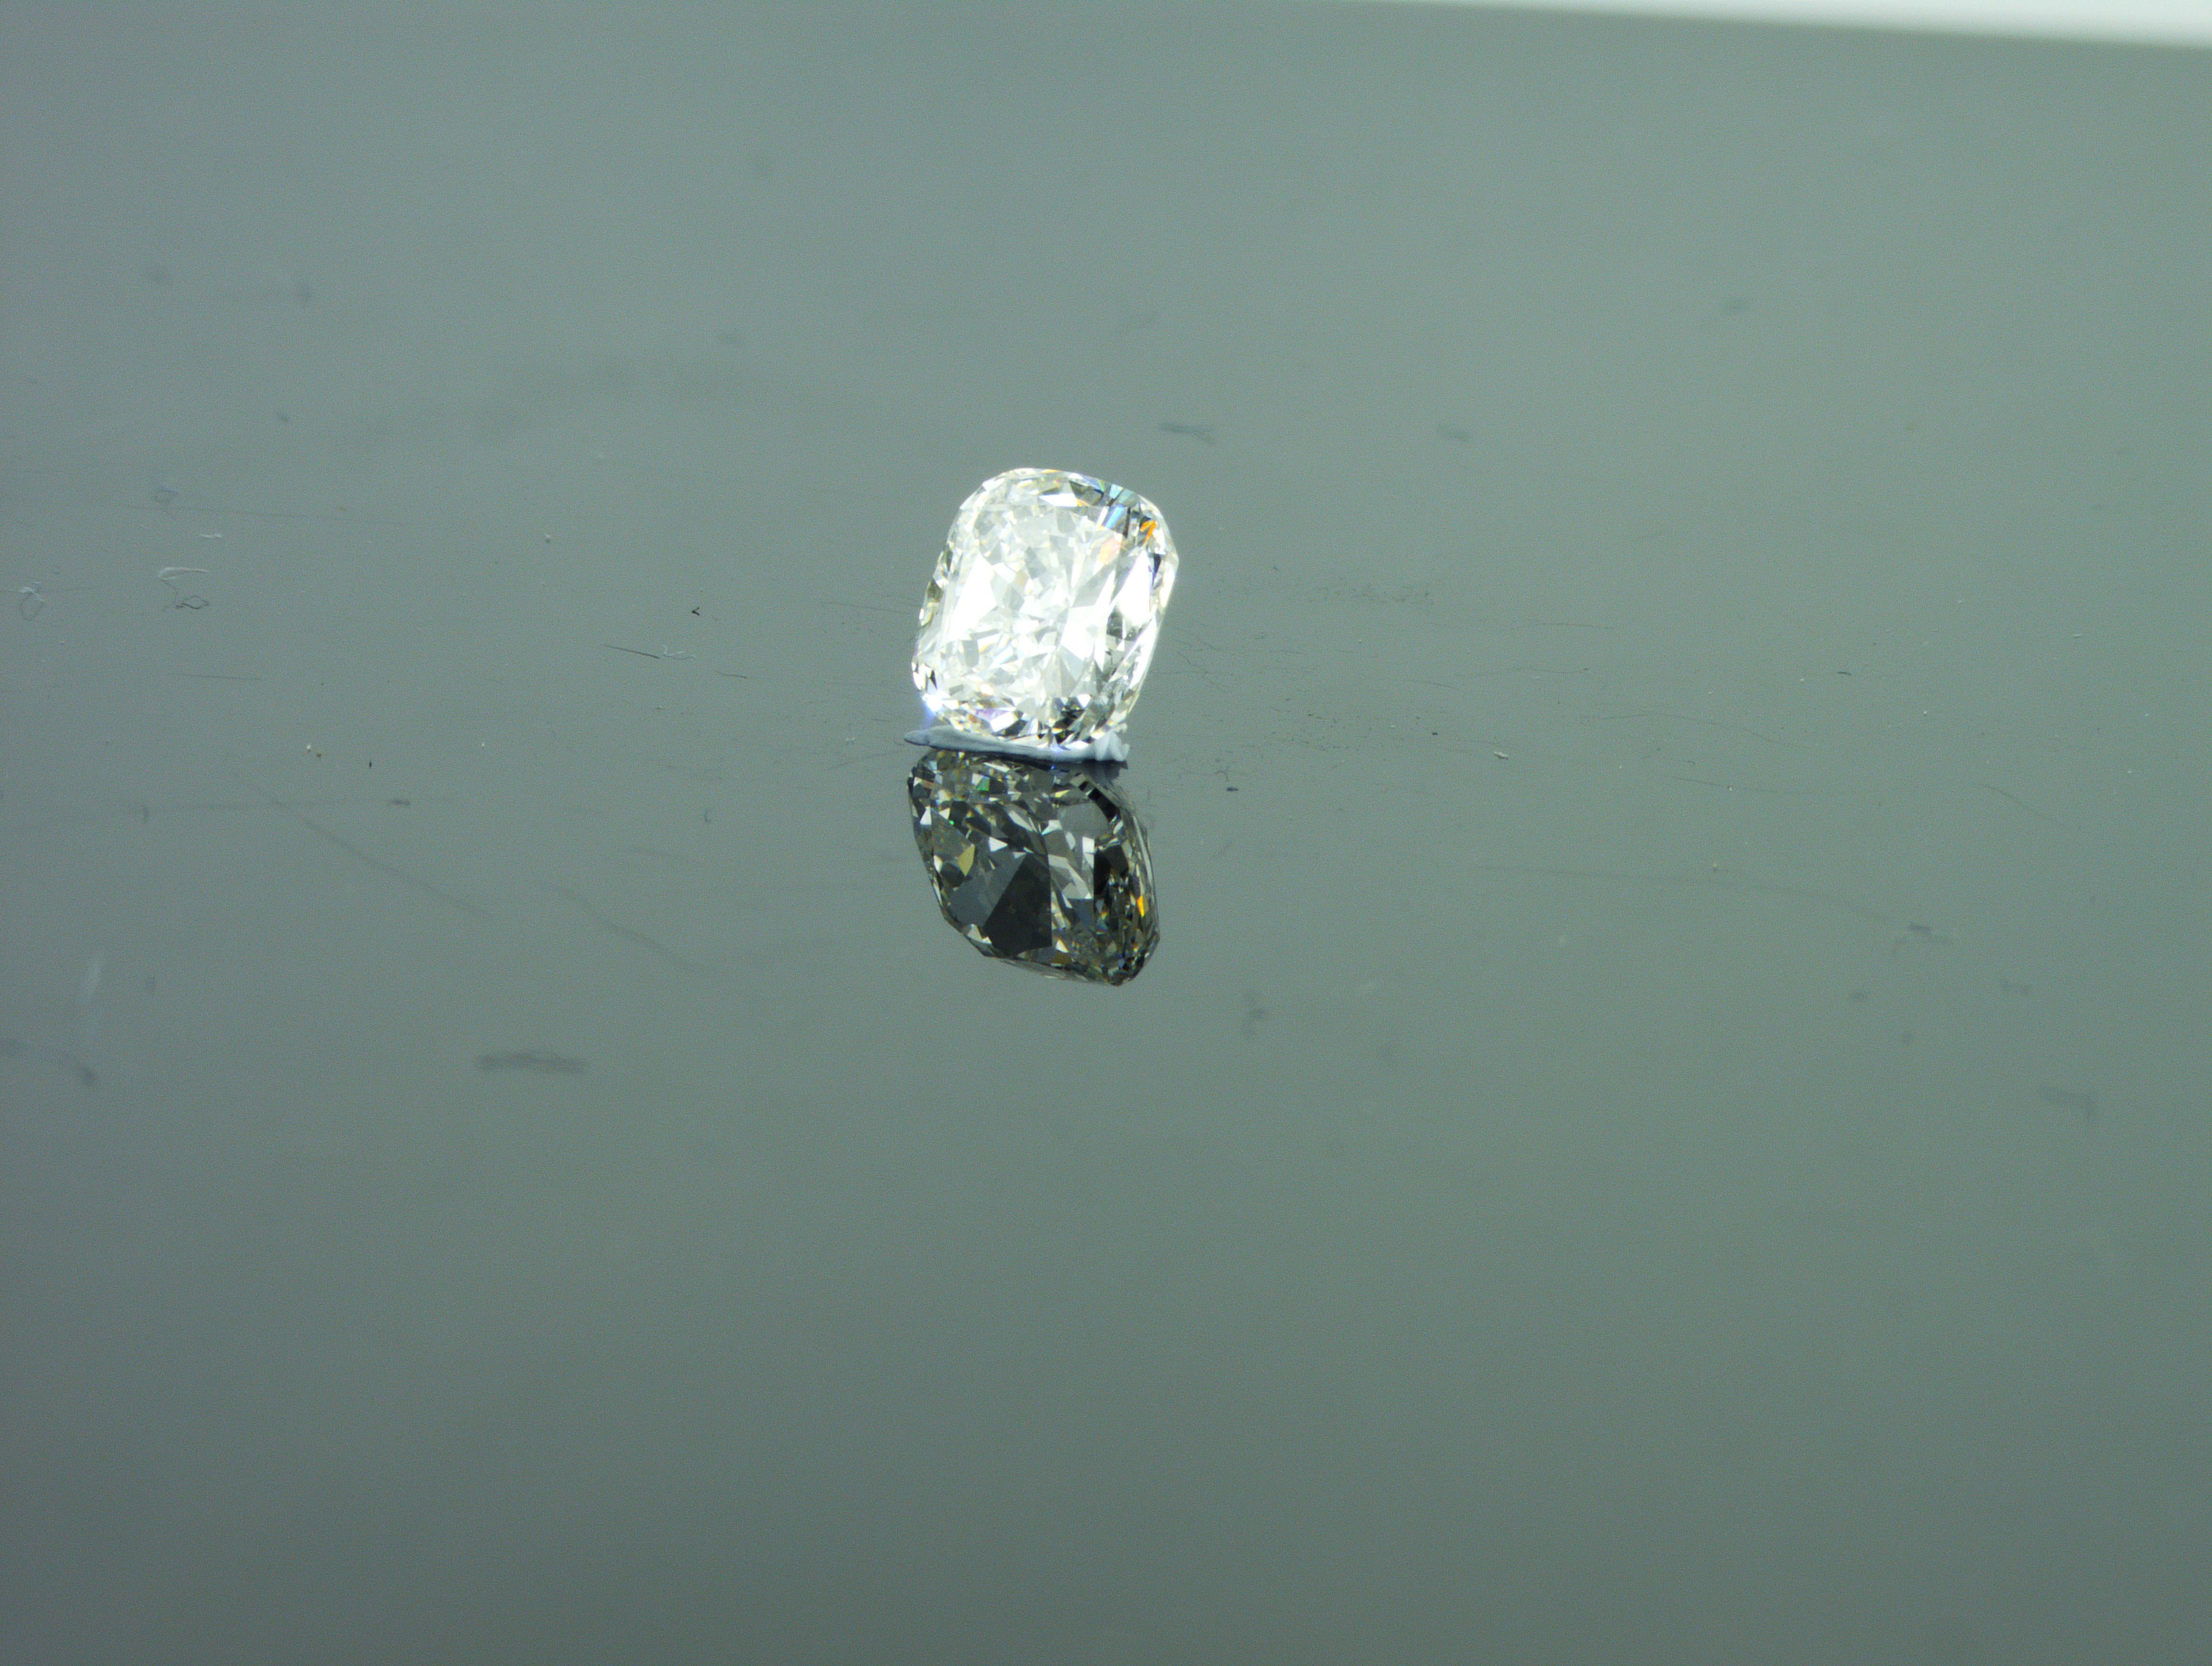 We are natural diamond production company located in Dubai.
Weight: 1.01ct
Shape: Cushion
Color: slightly tinted white + (I)
Clarity: VS1
Polish: Excellent
Symm: Good
Dimensions (mm): 5.94 x 5.73 x 3.74
All our diamonds with the inscription from the